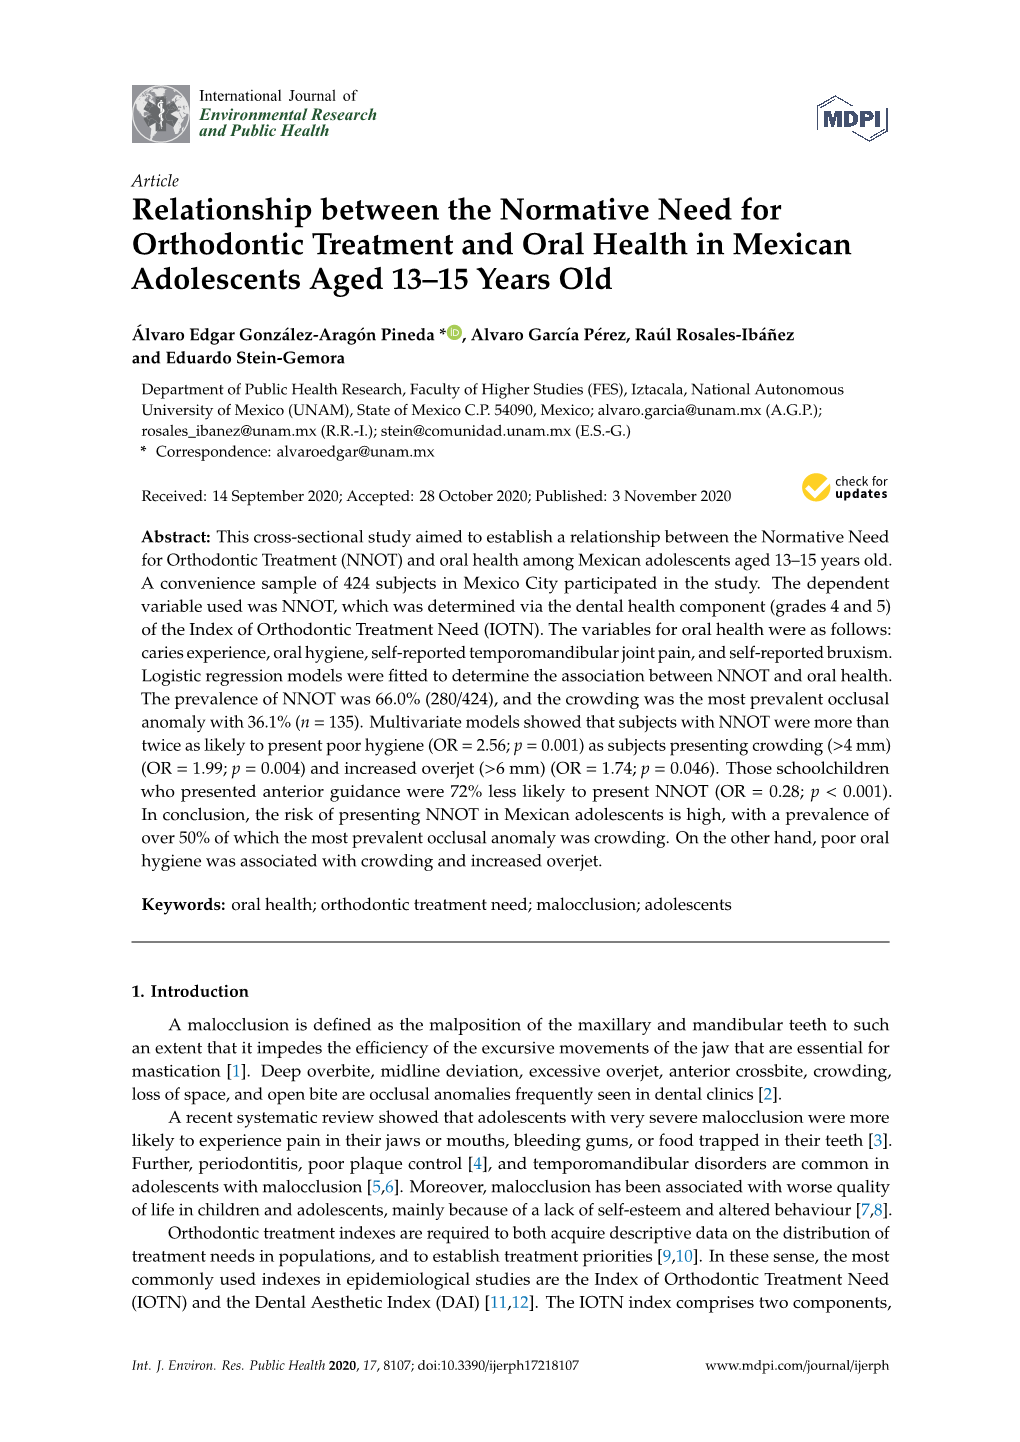 Relationship Between the Normative Need for Orthodontic Treatment and Oral Health in Mexican Adolescents Aged 13–15 Years Old